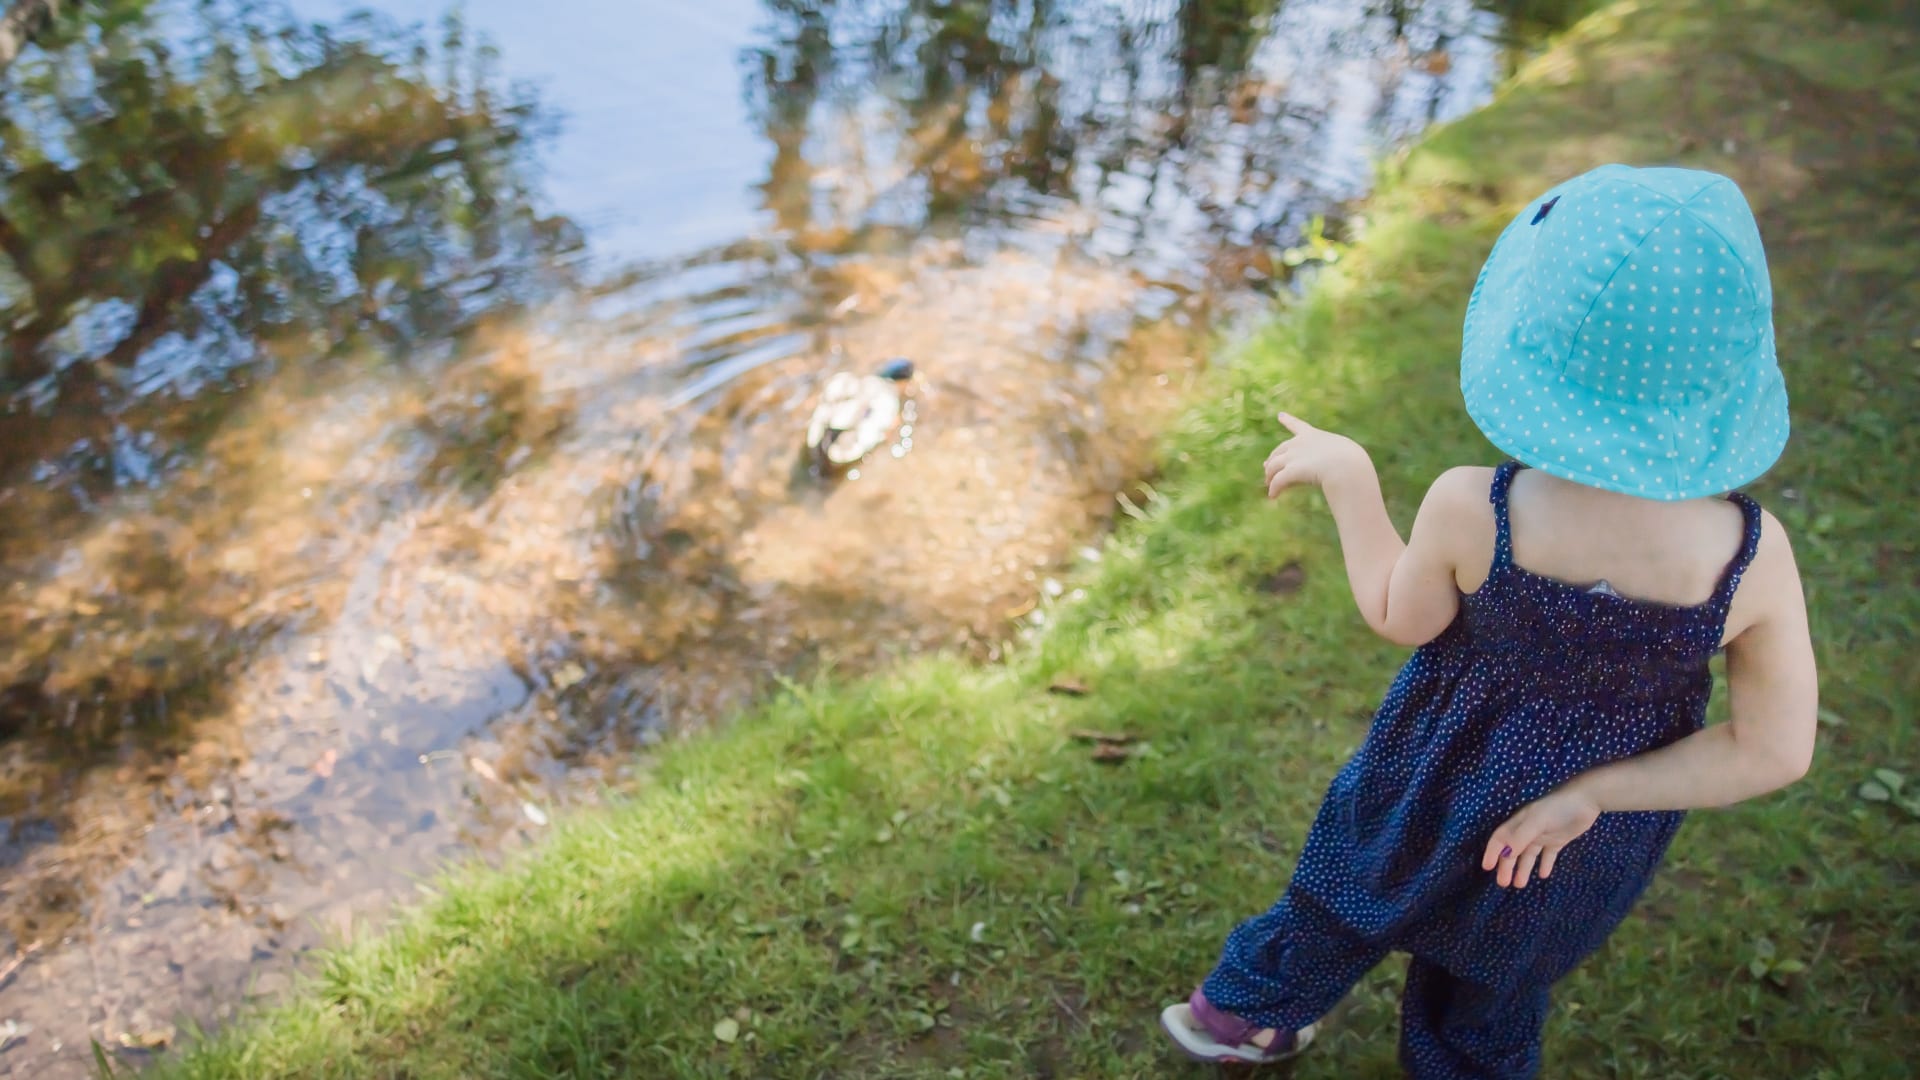 Child looking at a duck in a pond